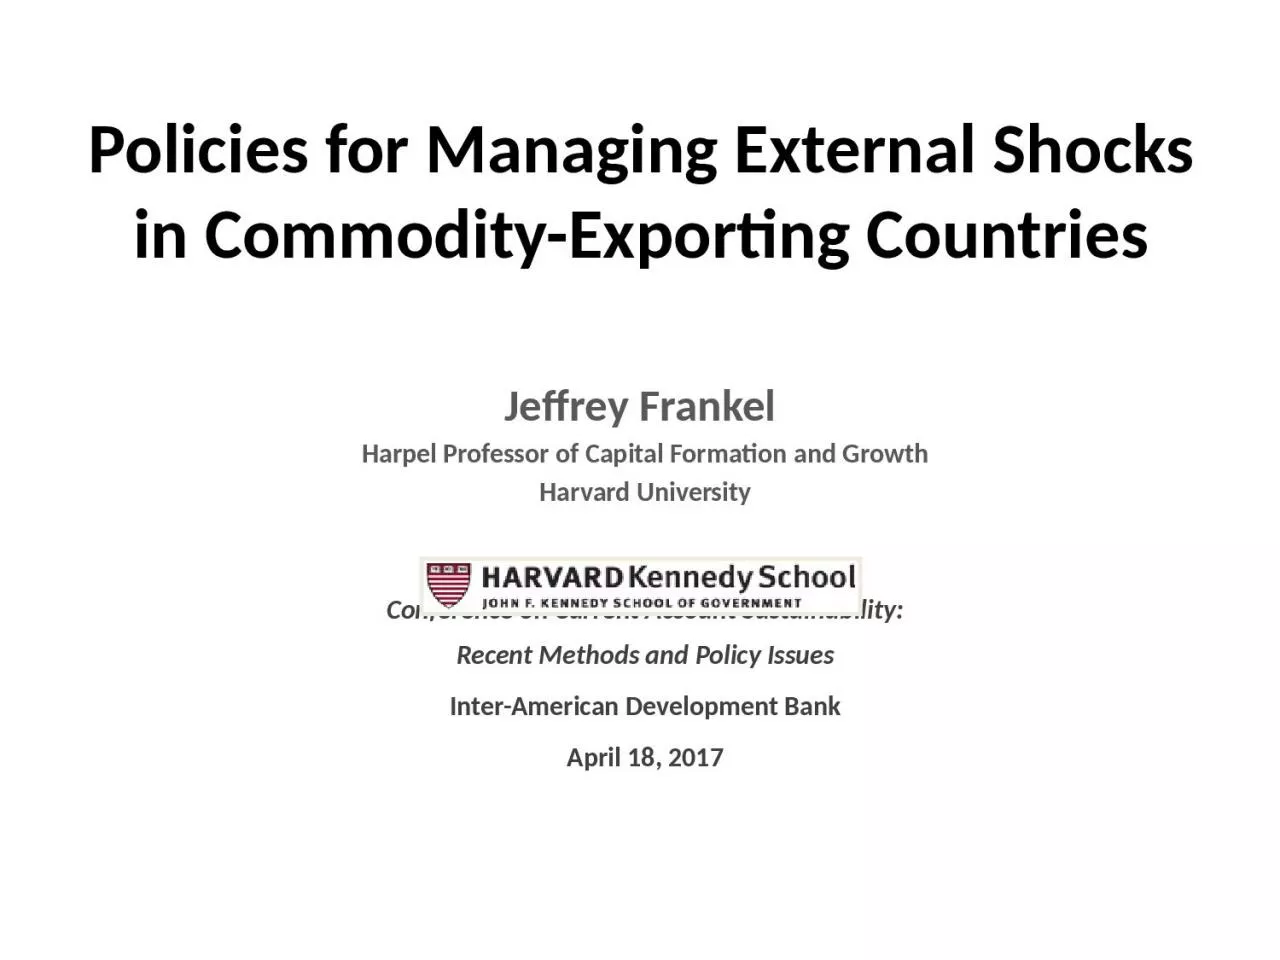 Policies for Managing External Shocks in Commodity-Exporting Countries